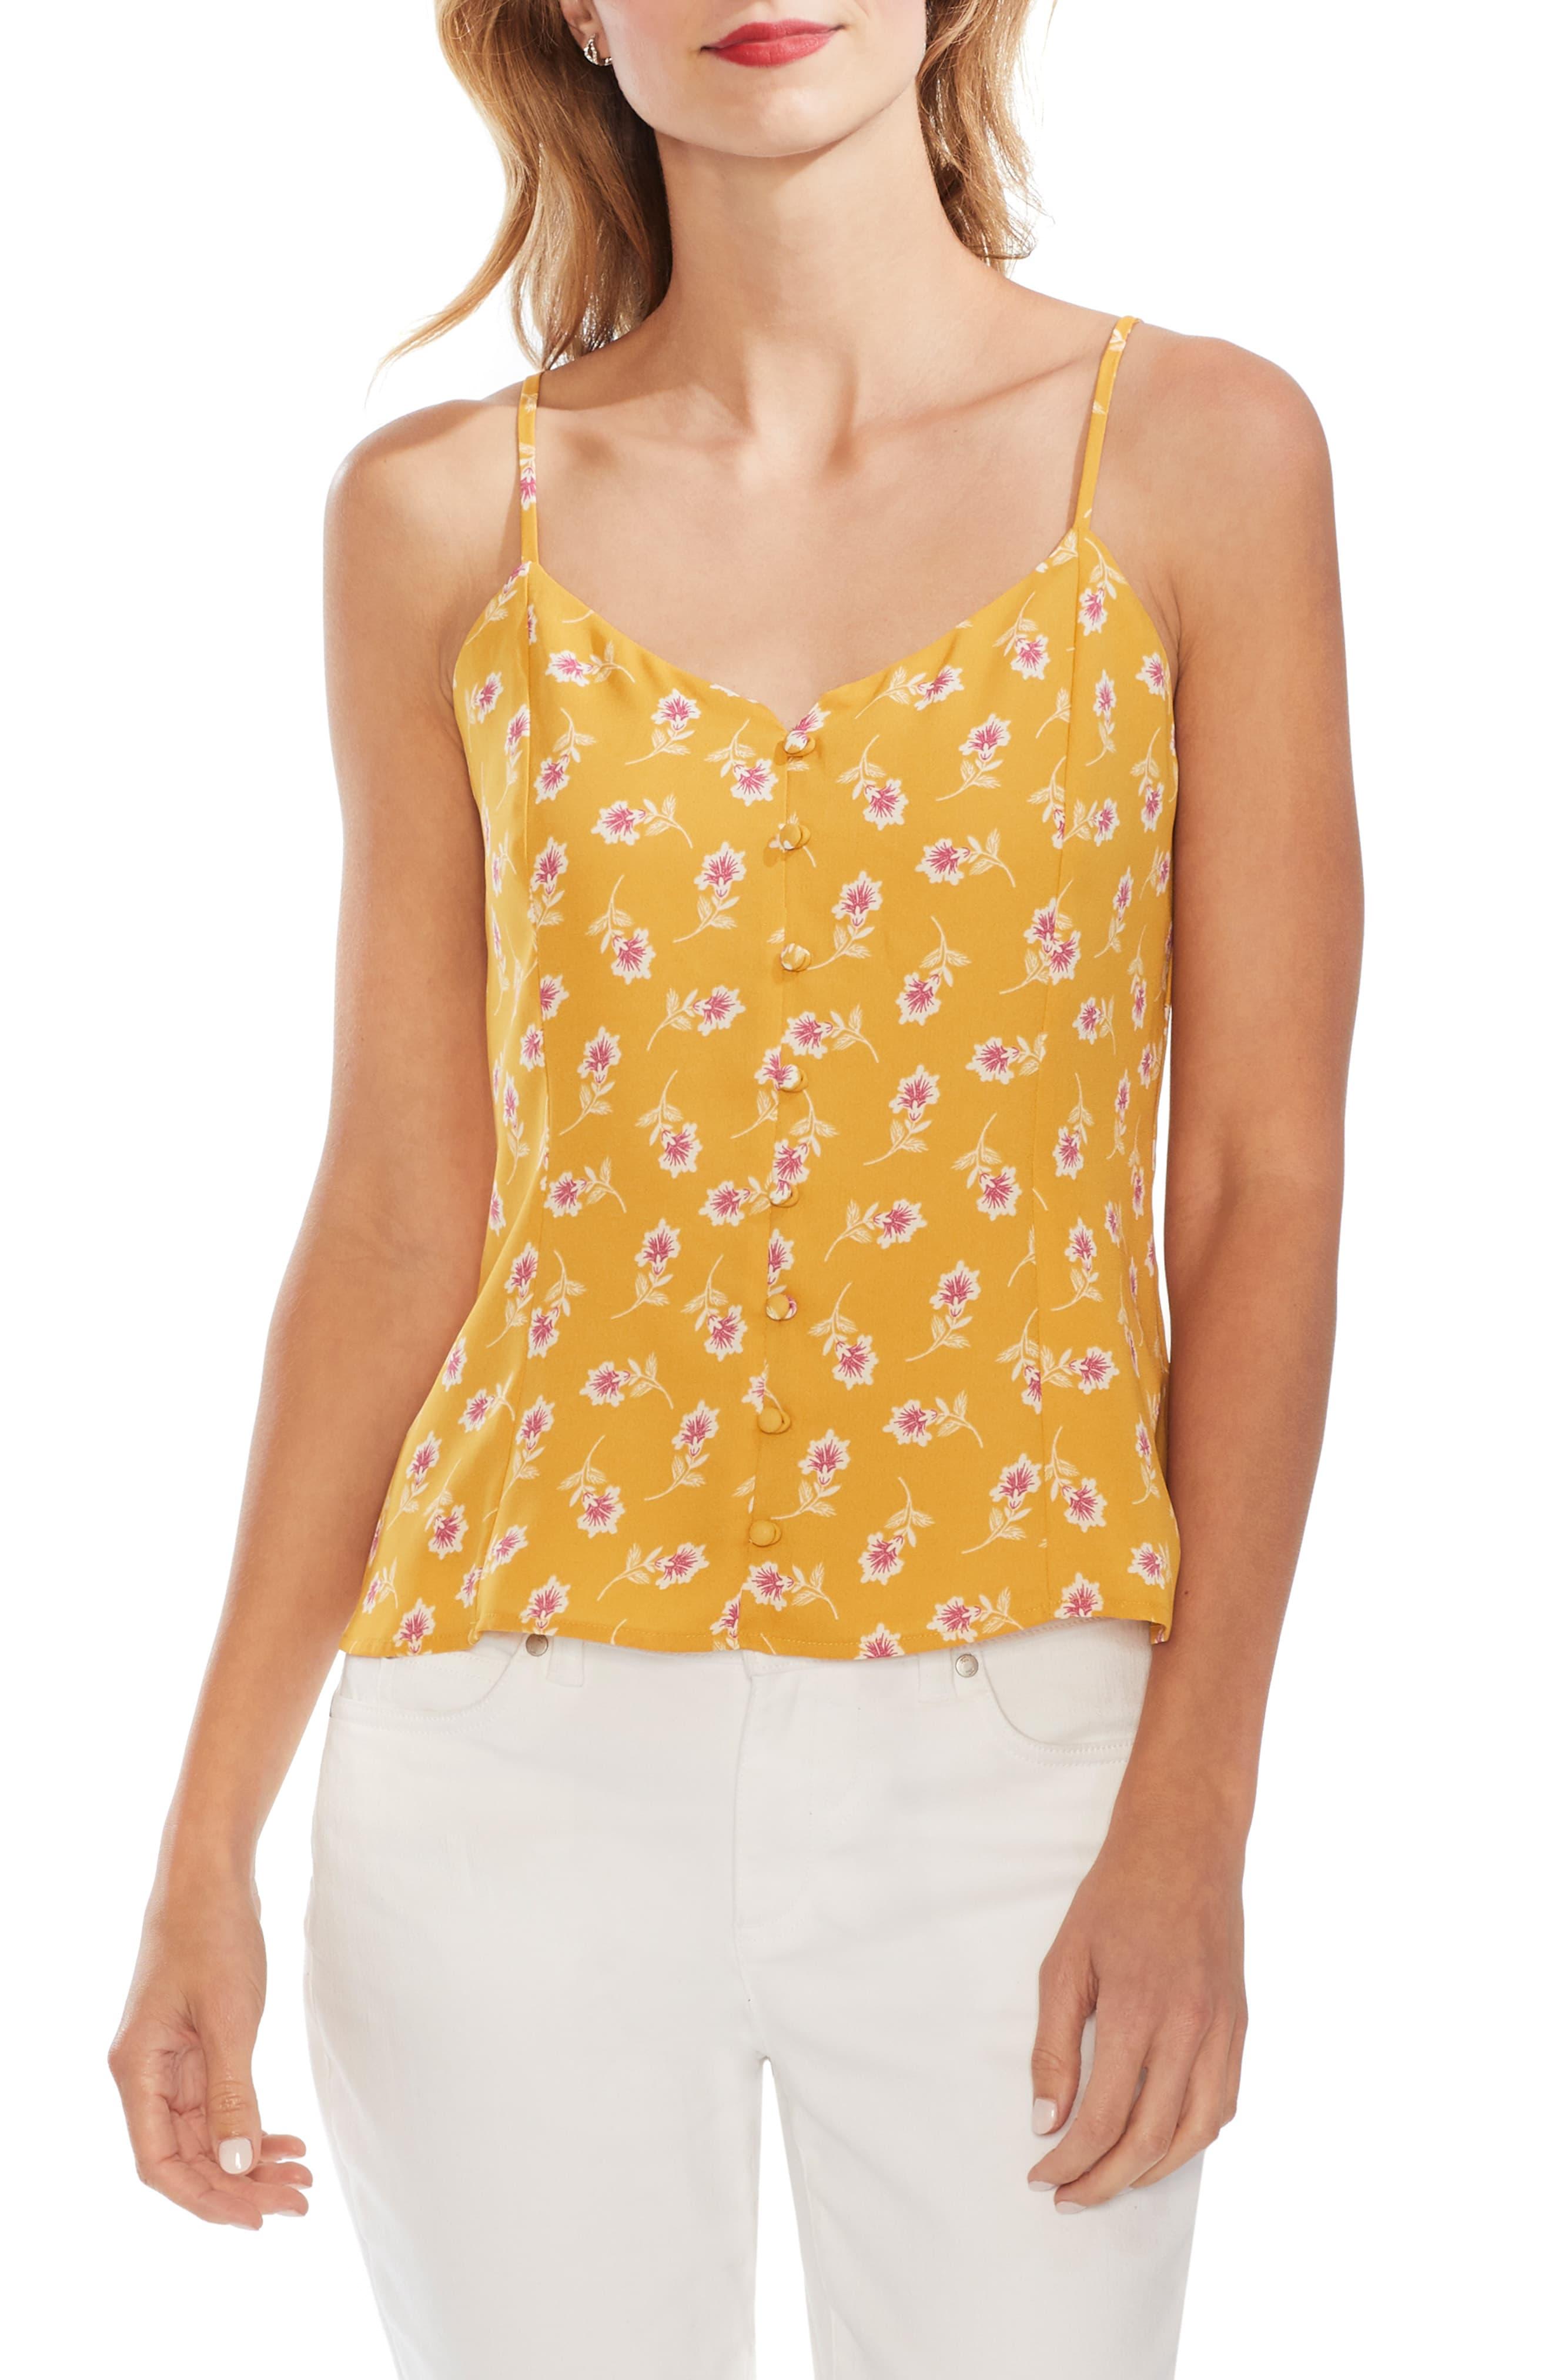 Vince Camuto Ditsy Floral Print Button Front Camisole in Yellow - Lyst